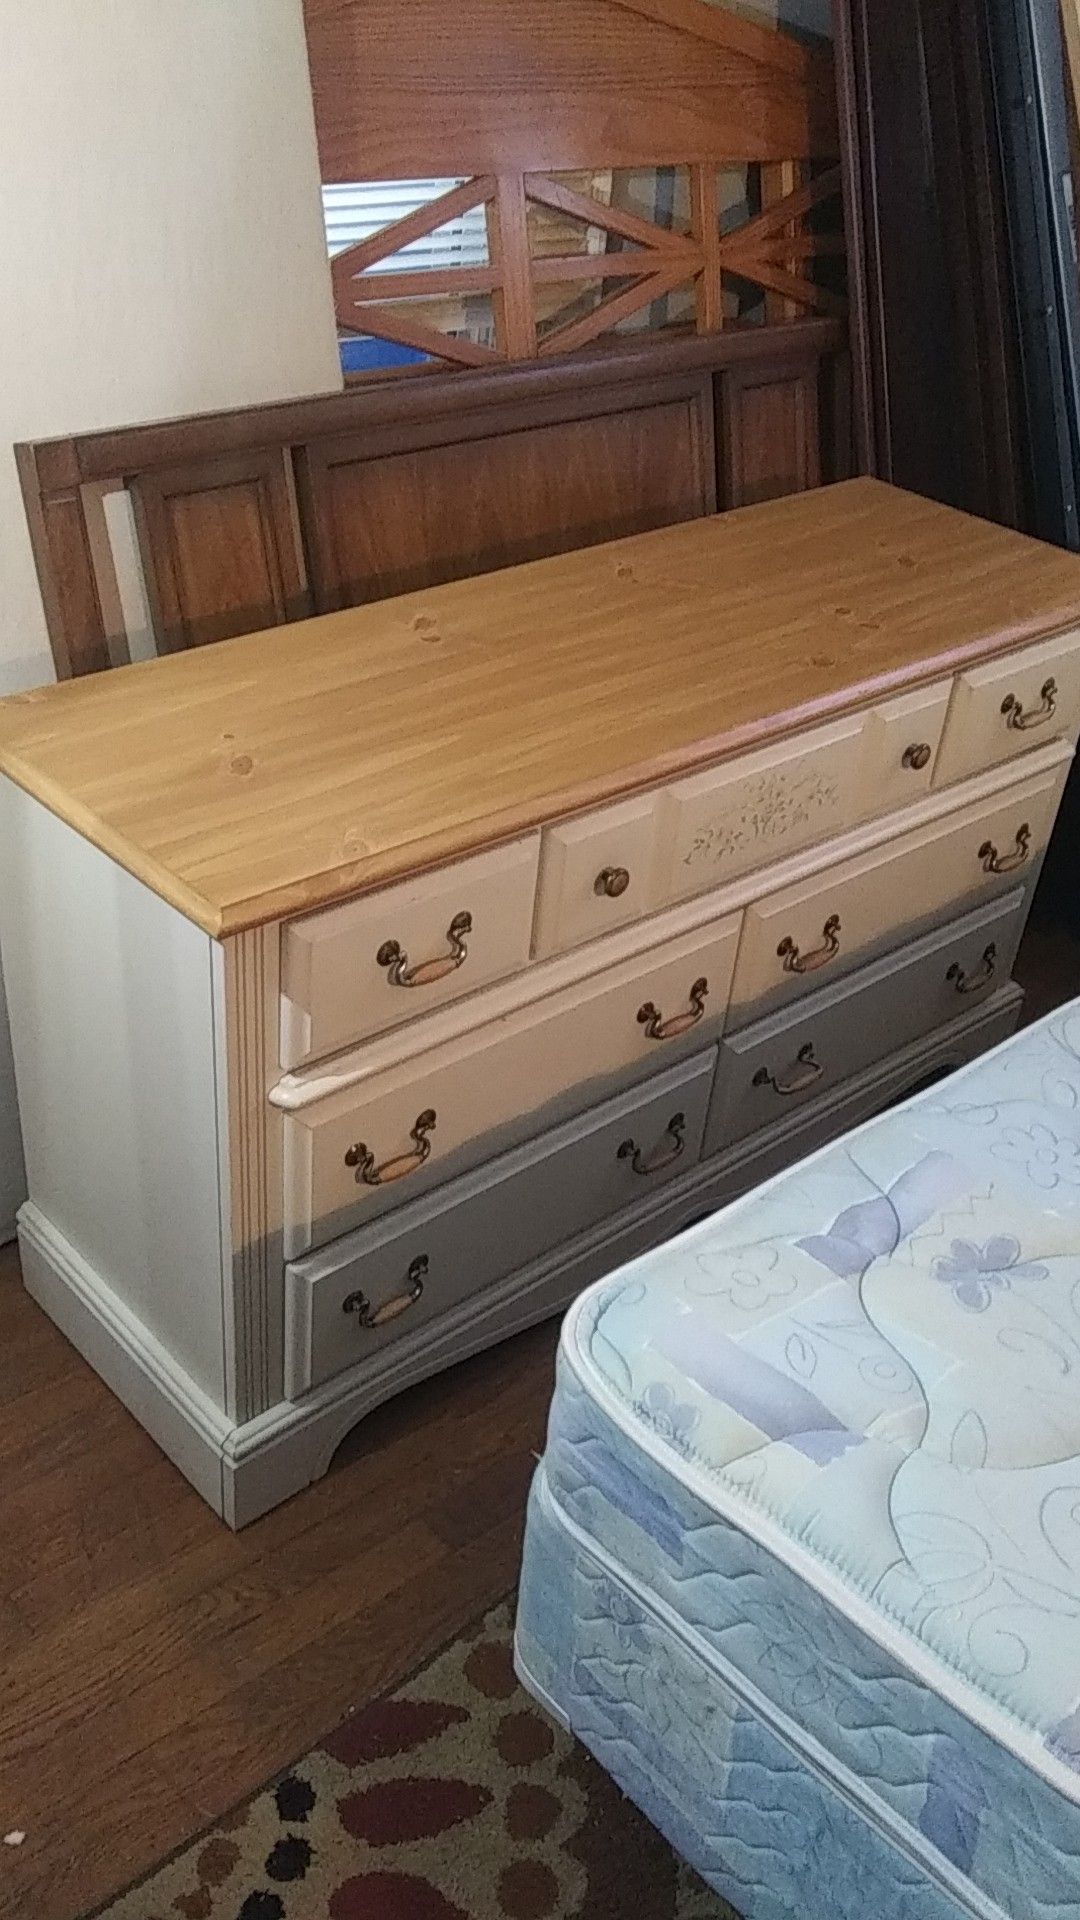 Super nice 7 drawer dresser. Excellent condition! All drawers function great!